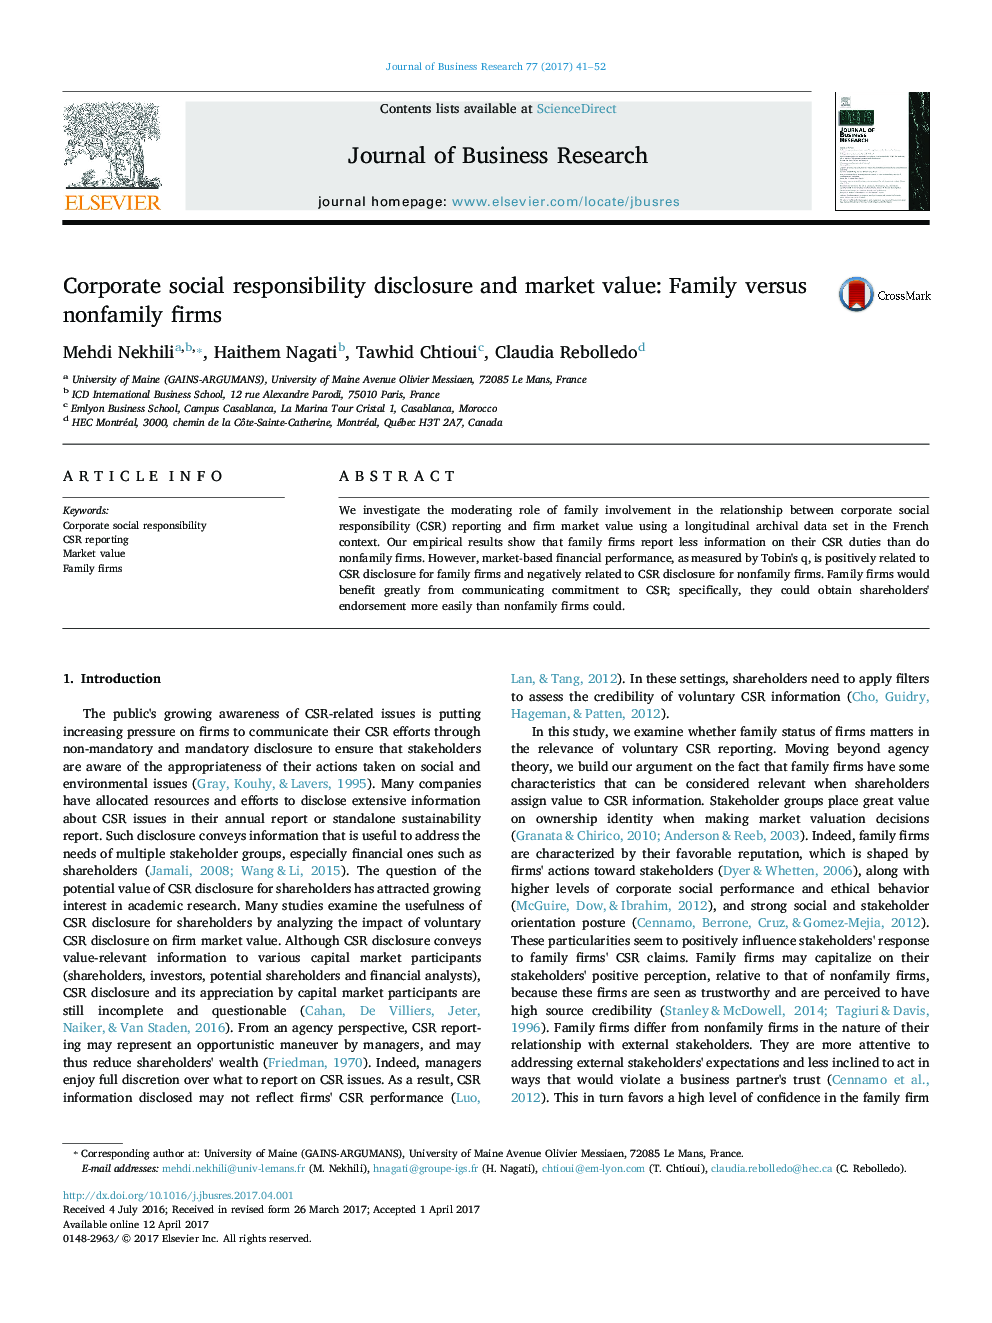 Corporate social responsibility disclosure and market value: Family versus nonfamily firms